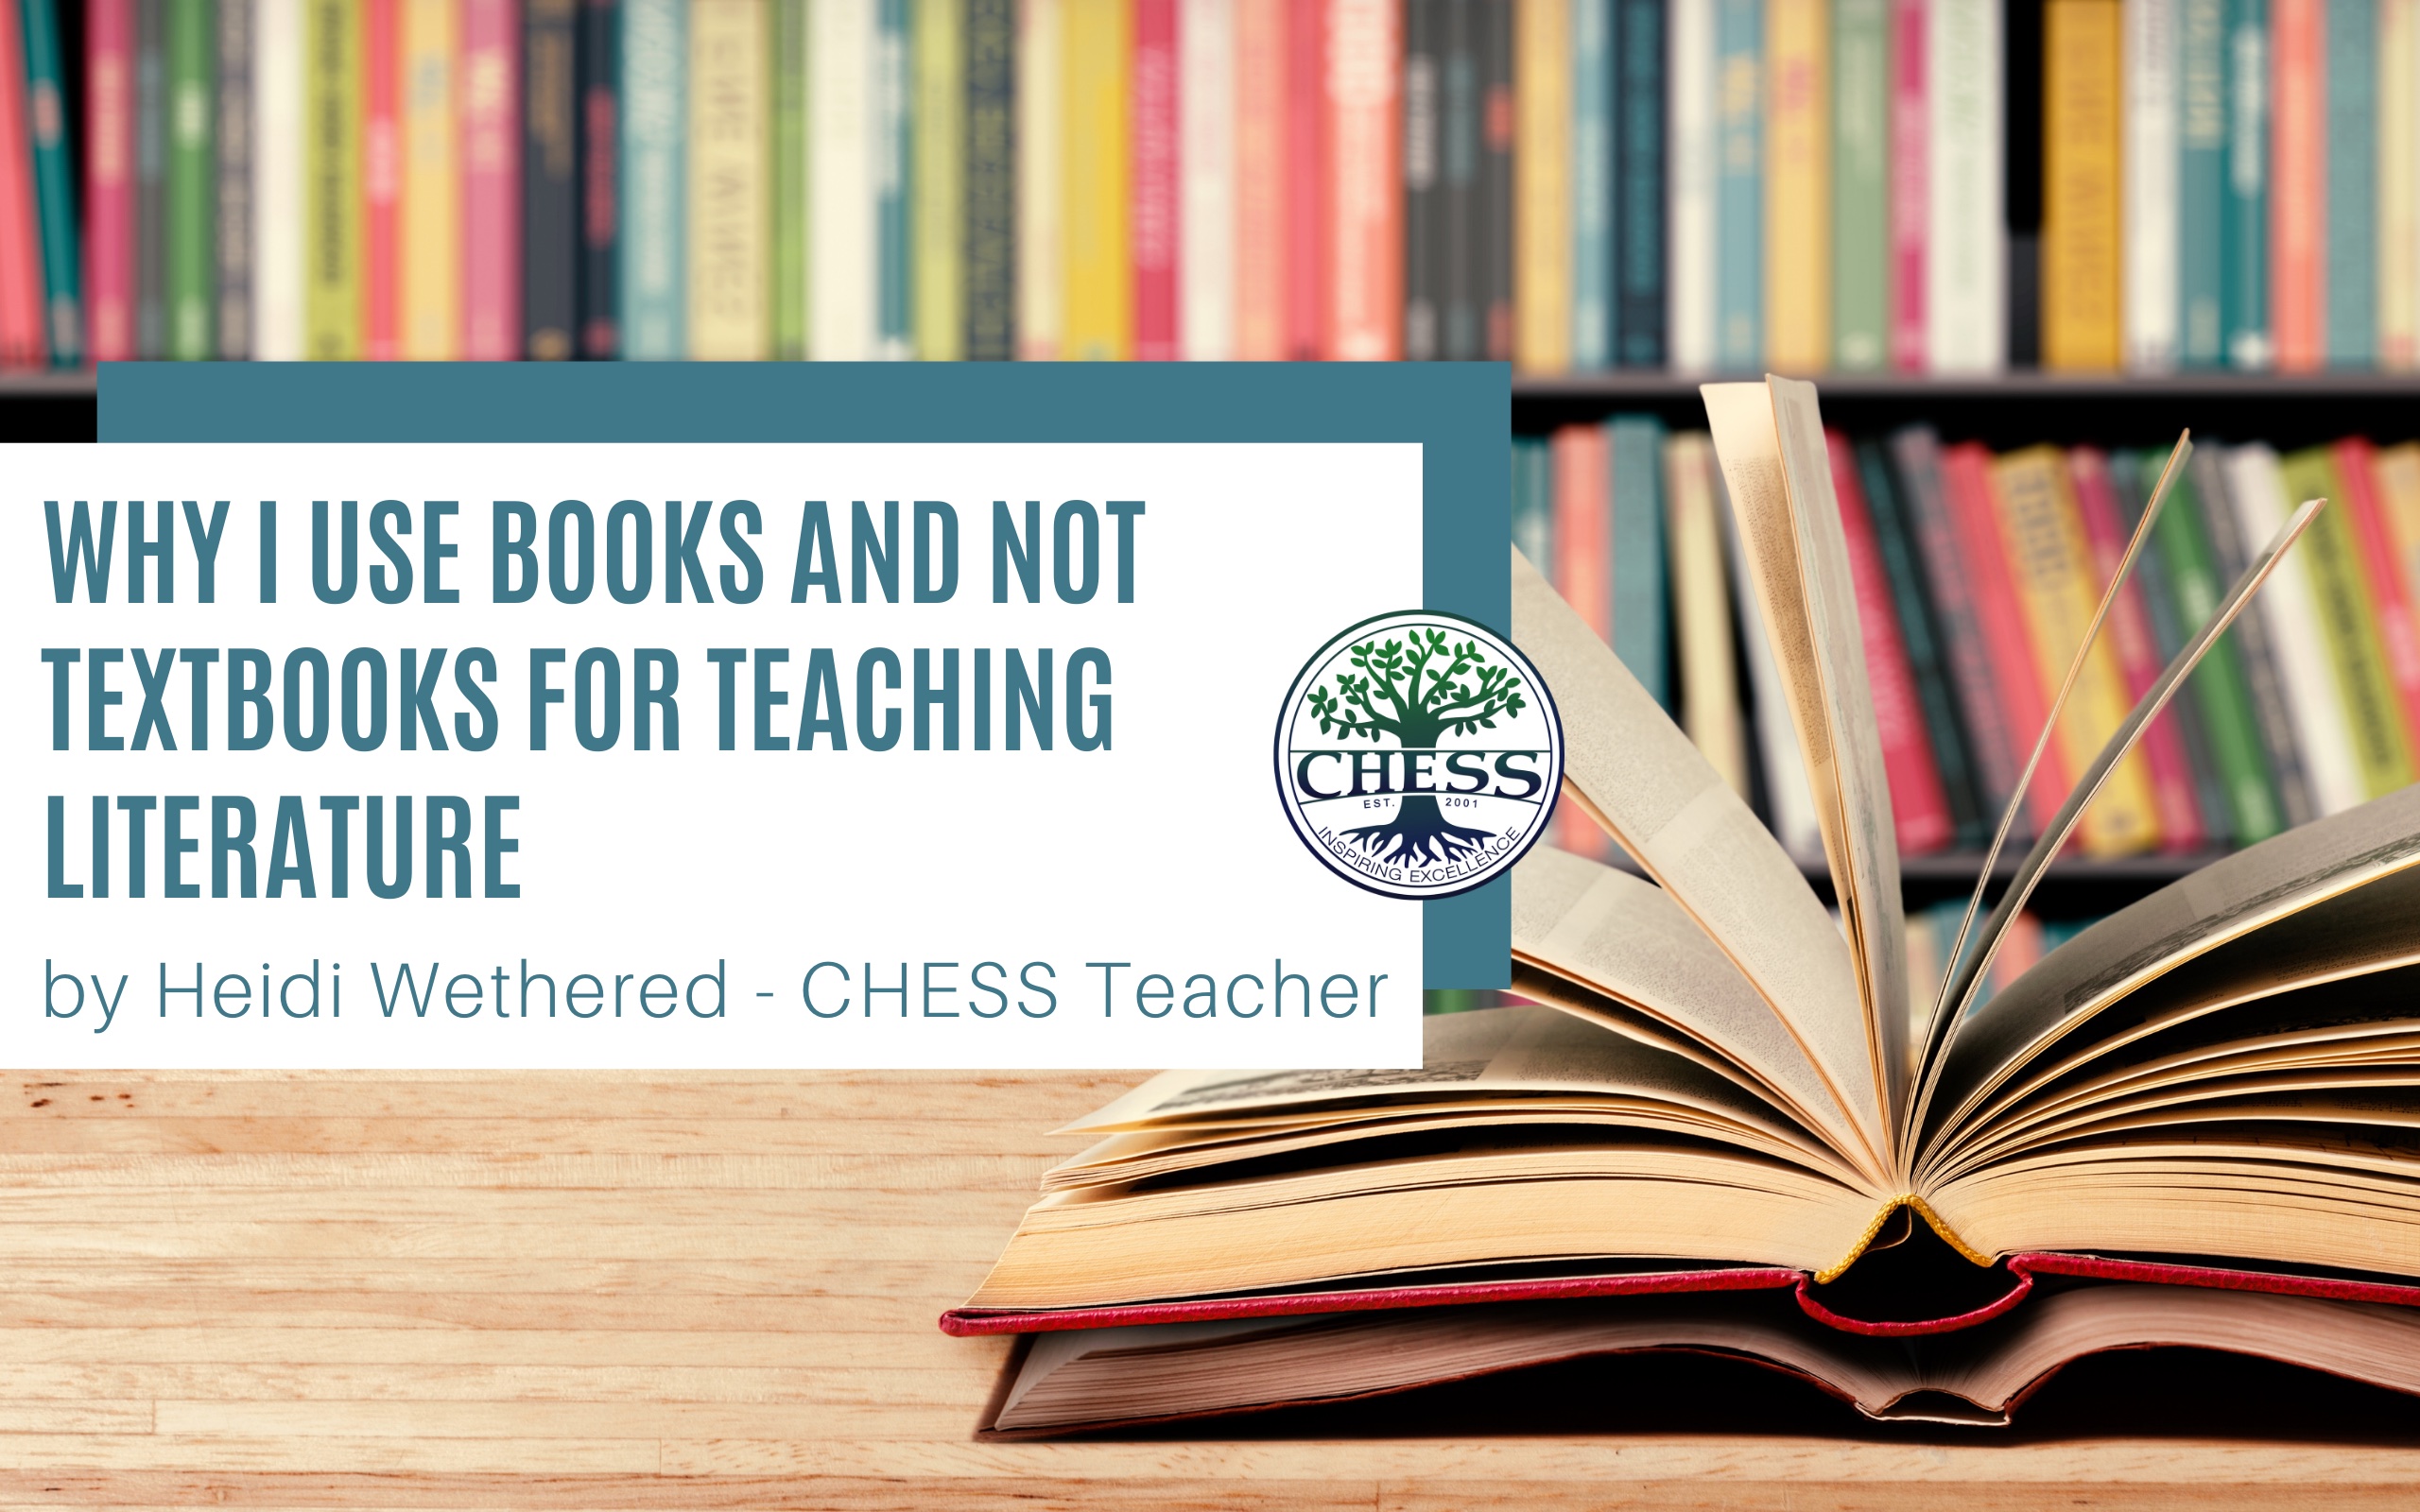 WHY I USE BOOKS AND NOT TEXTBOOKS FOR TEACHING LITERATURE